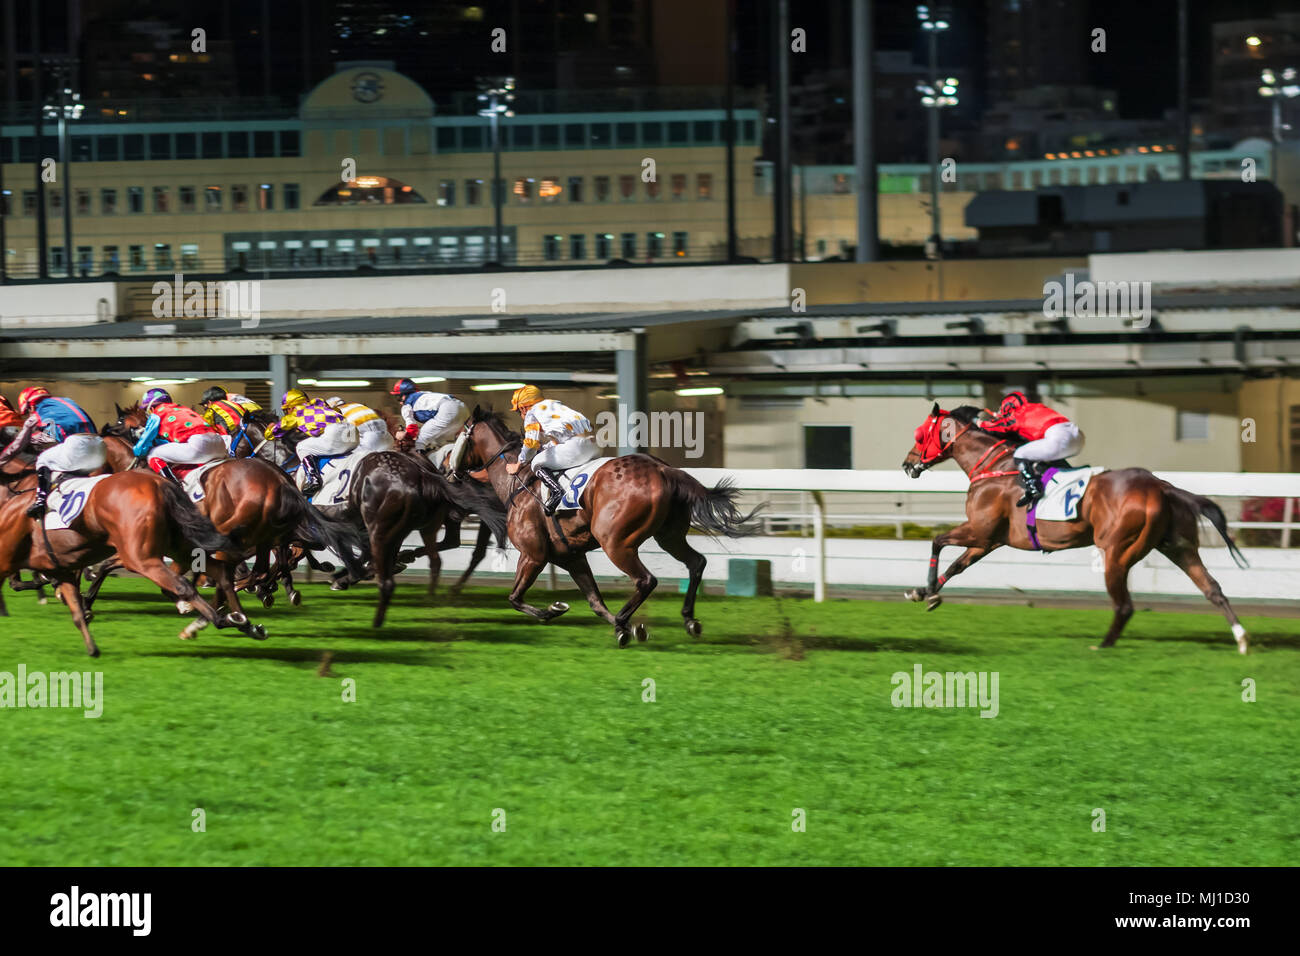 Racehorses ridden by jockeys running fast during the race at racetrack. Striving to victory. Hong Kong Happy Valley race course. Motion blur. Stock Photo